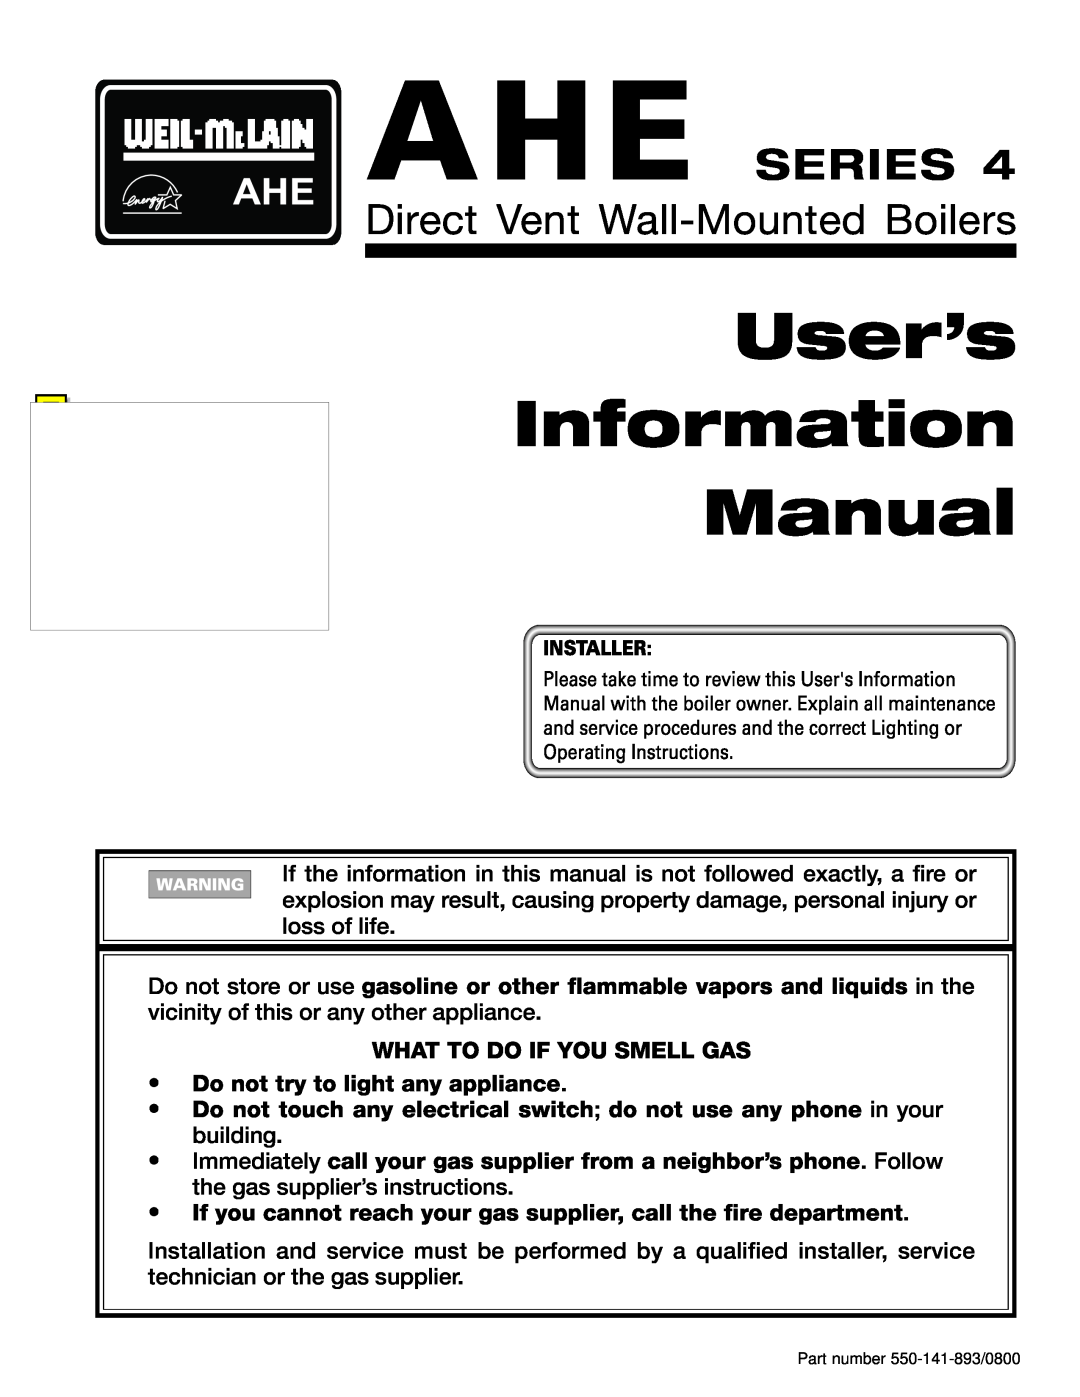 Honeywell Series 4 manual User’s Information Manual, Ahe Series, Direct Vent Wall-Mounted Boilers 